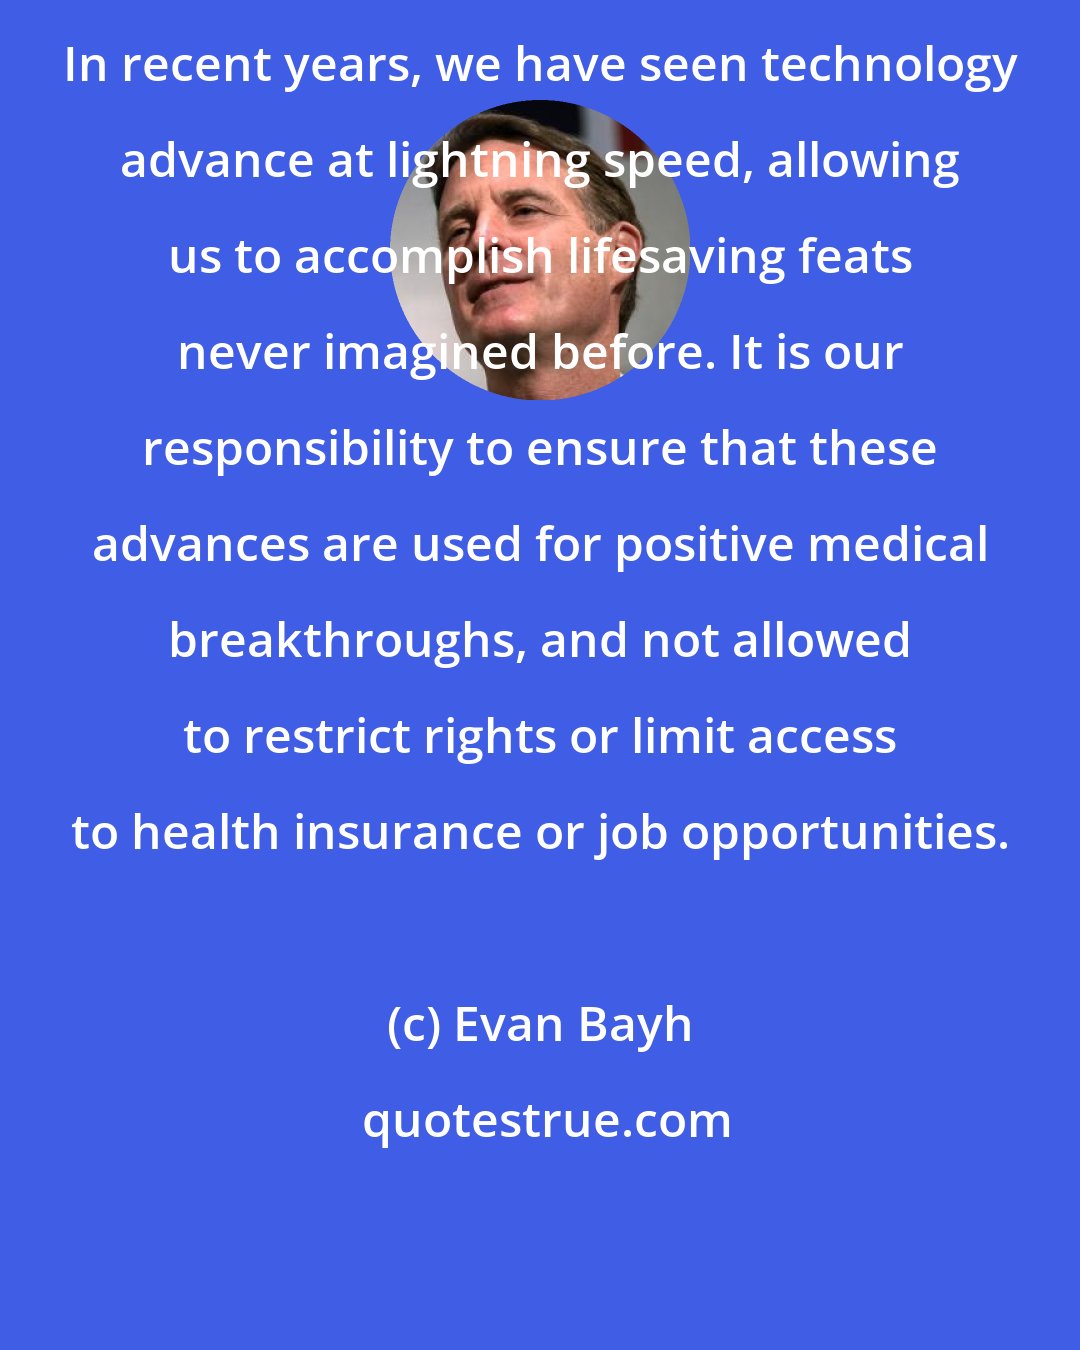 Evan Bayh: In recent years, we have seen technology advance at lightning speed, allowing us to accomplish lifesaving feats never imagined before. It is our responsibility to ensure that these advances are used for positive medical breakthroughs, and not allowed to restrict rights or limit access to health insurance or job opportunities.